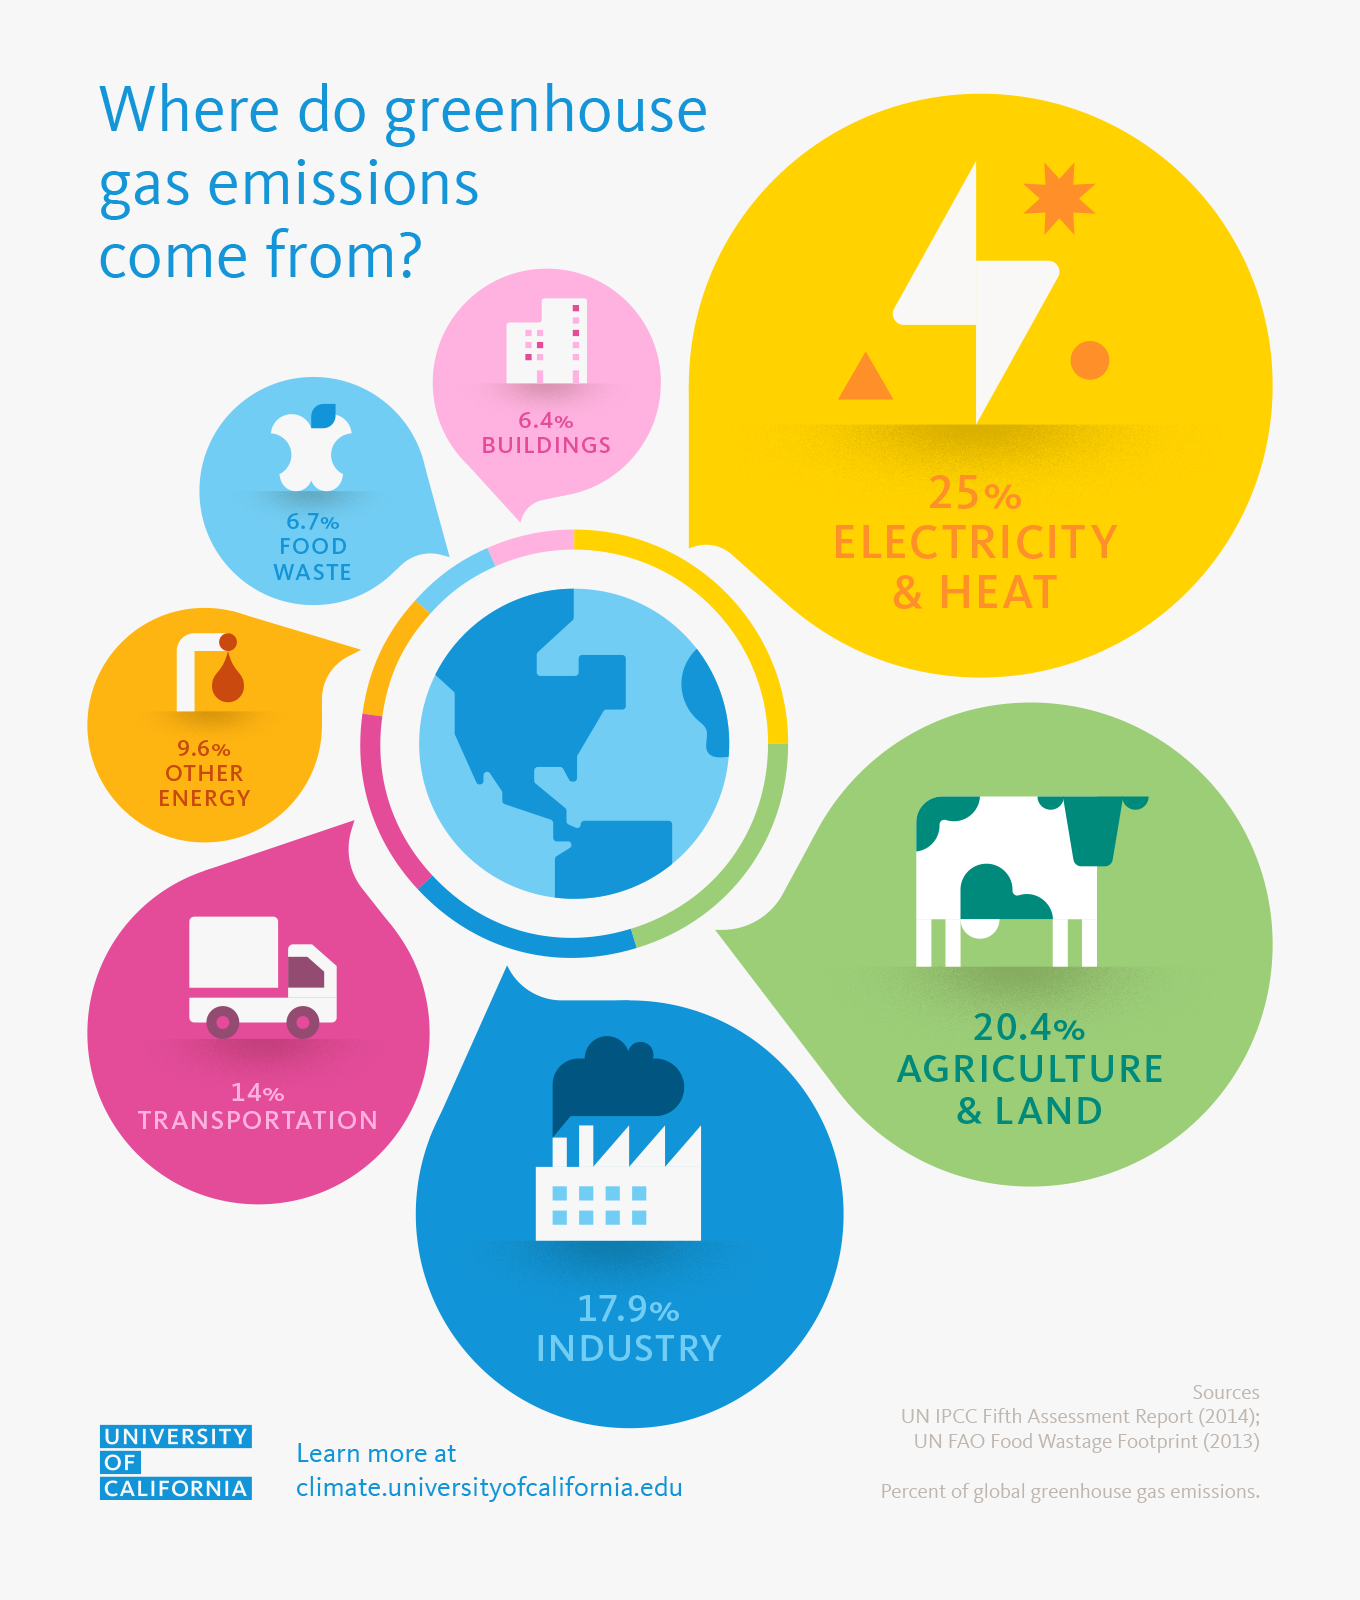 Where do greenhouse gas emissions come from? University of California